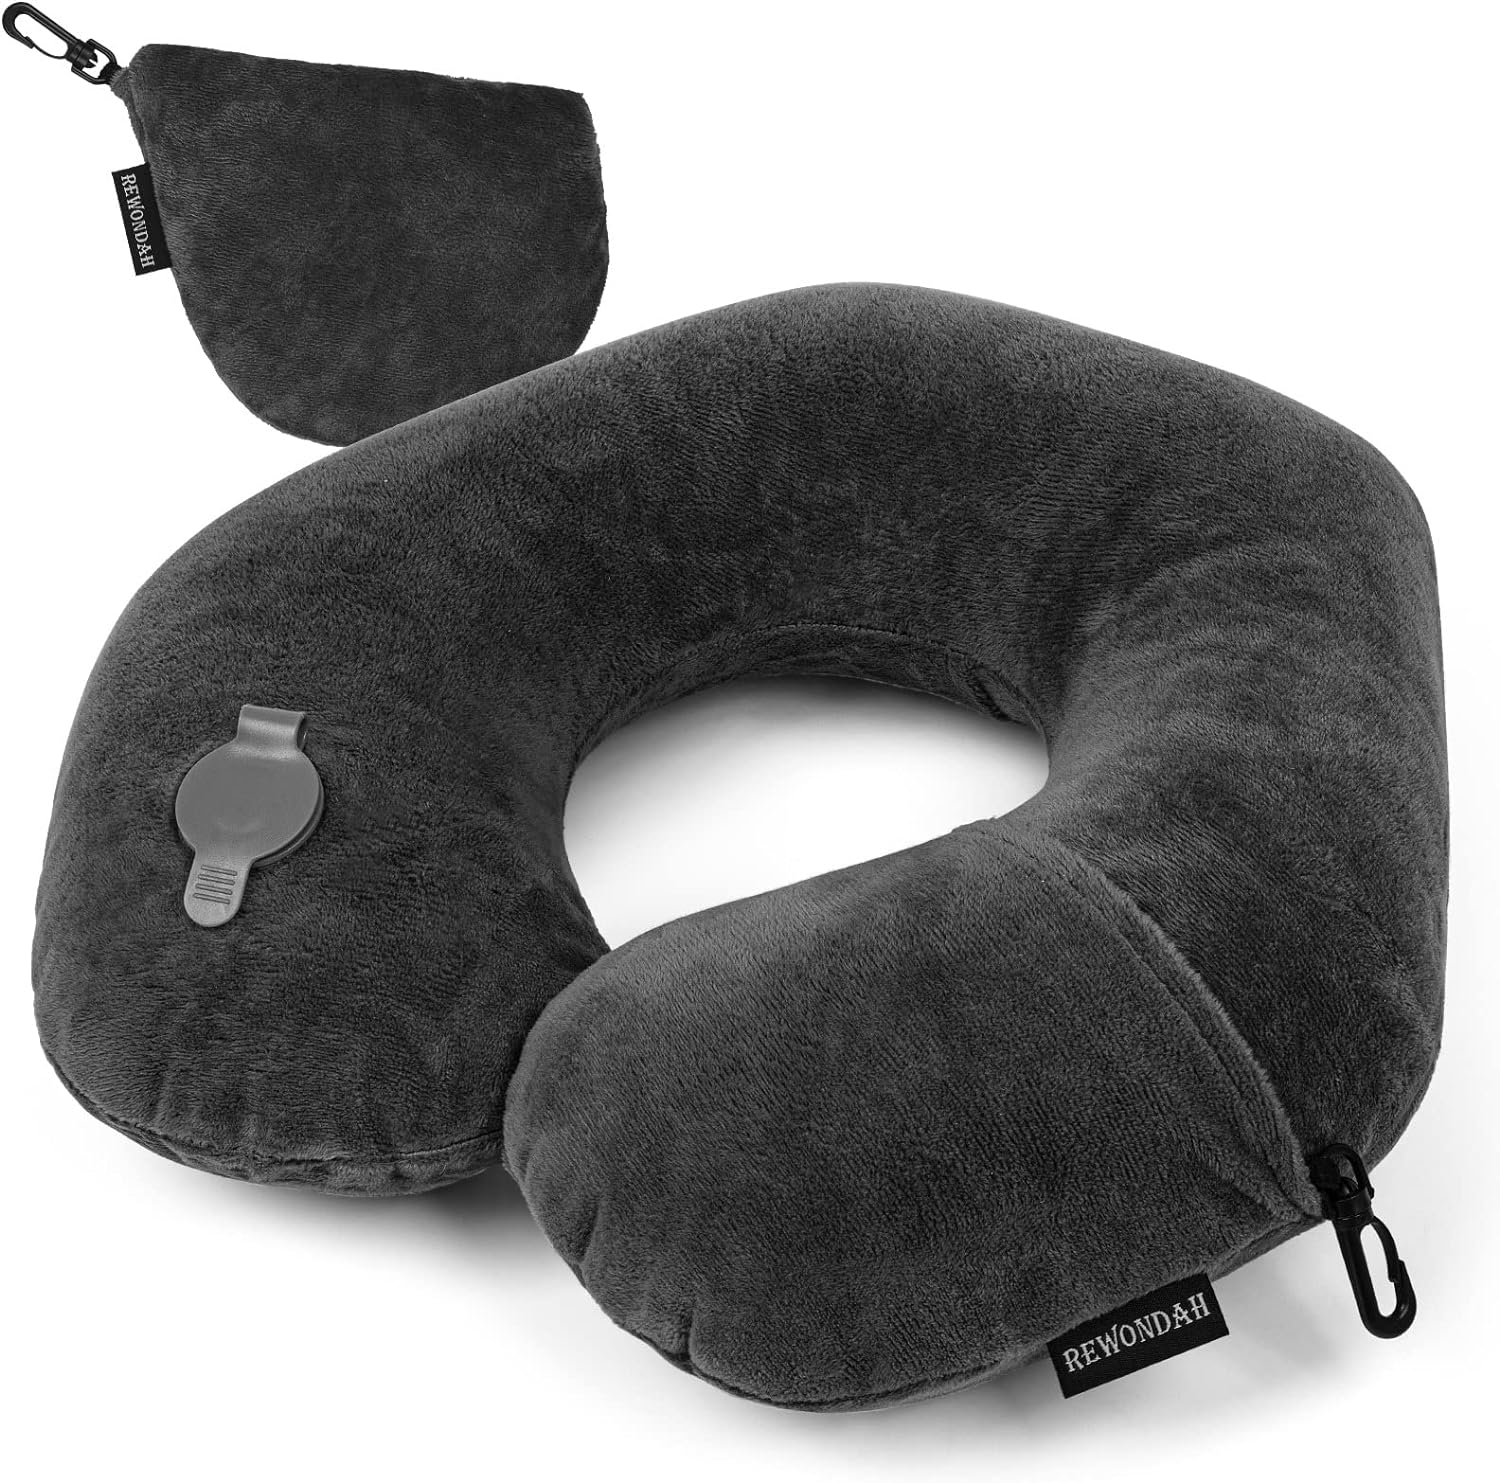 I ordered 5 of these before our last family trip, and I am SO glad I did! We were only traveling with backpacks (#frontierairlines) and had some late/overnight flights, so I wanted to be able to sleep. These neck pillows fold up into a little bundle and we hooked them right on our backpacks. They are super easy to inflate/deflate, so you can pop it up when you want it and quickly put it away when you're done. AND you can adjust the thickness to fit your position. The covers are really soft and c